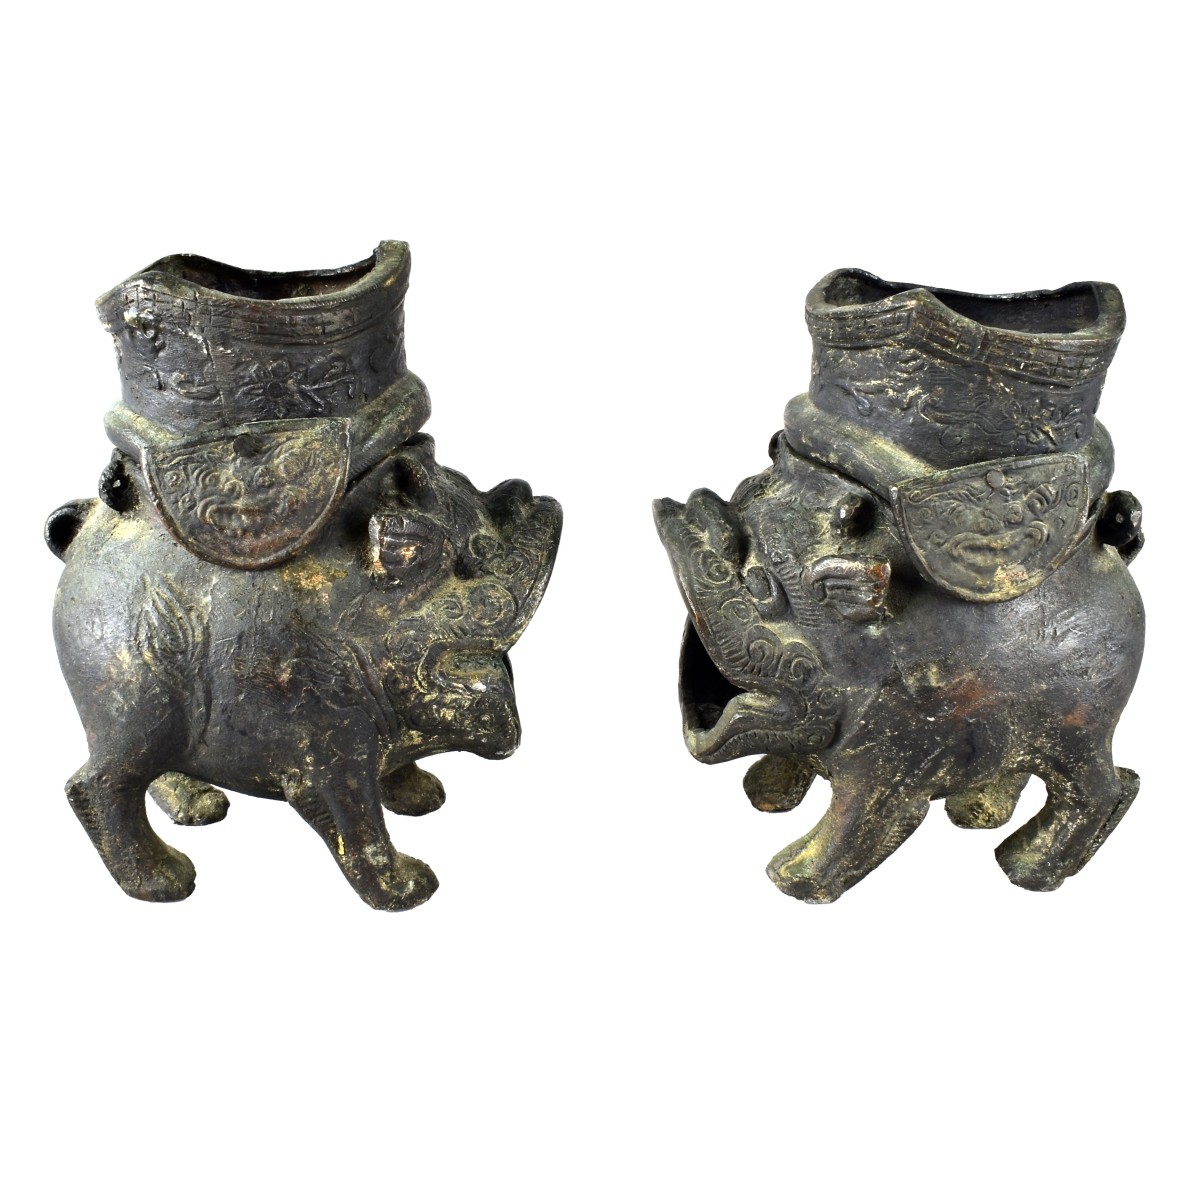 Pair of Chinese Incense Burners